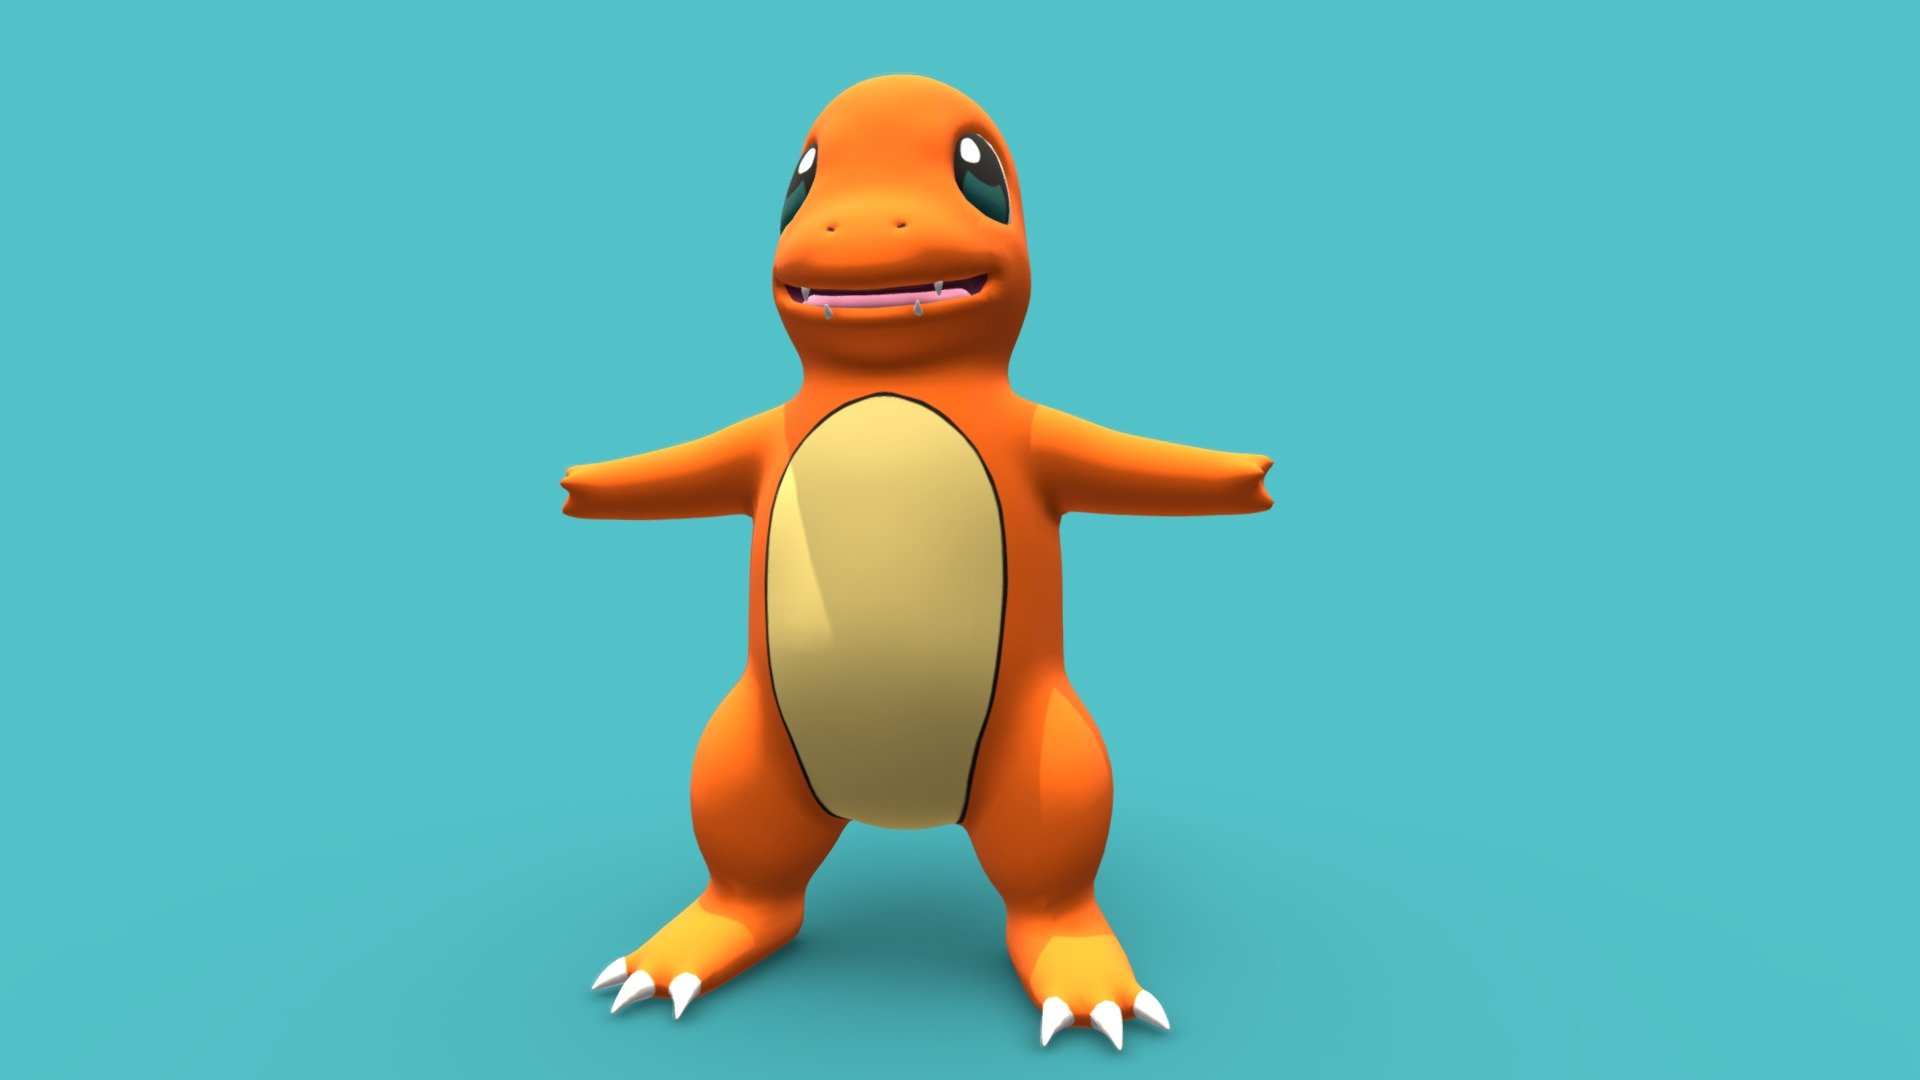 3D video game ready Charmander asset from Pokemon. Made in ZBrush, Maya, Blender, and Substance Painter 3d model